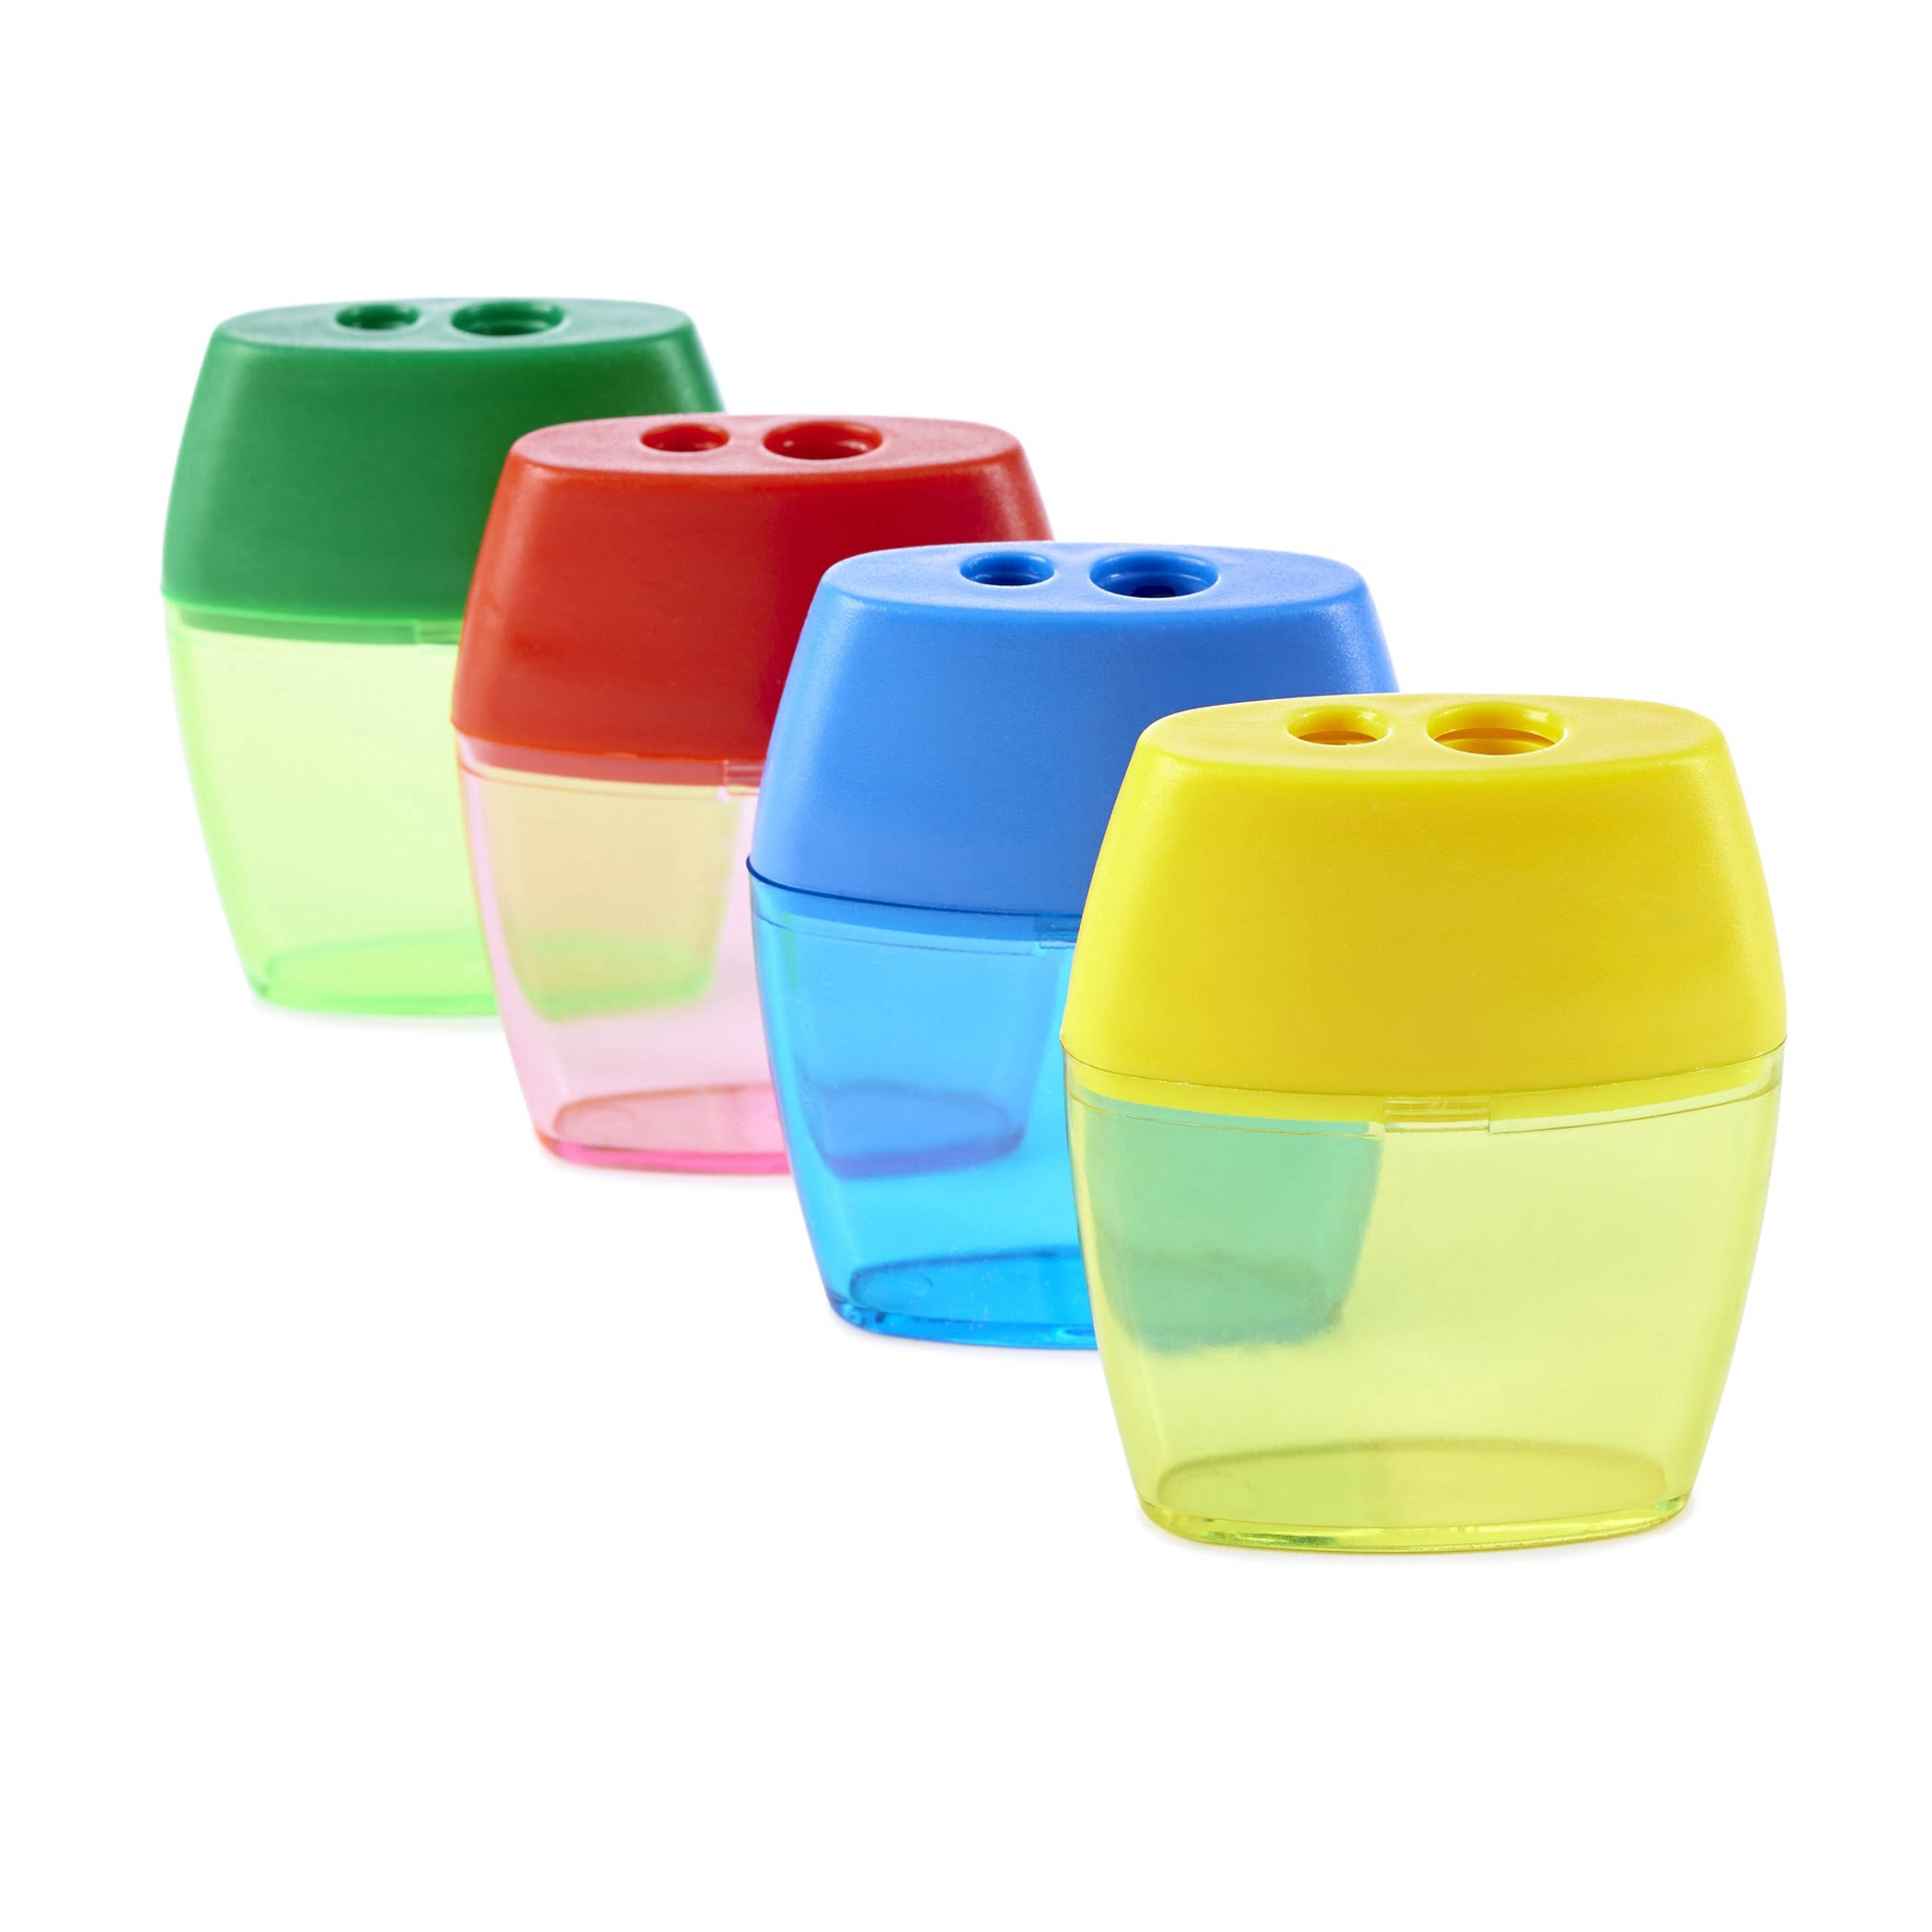 Charles Leonard 1 Pencil Sharpener 2 Hole w/ RECEPTACL (Color May Vary), Assorted